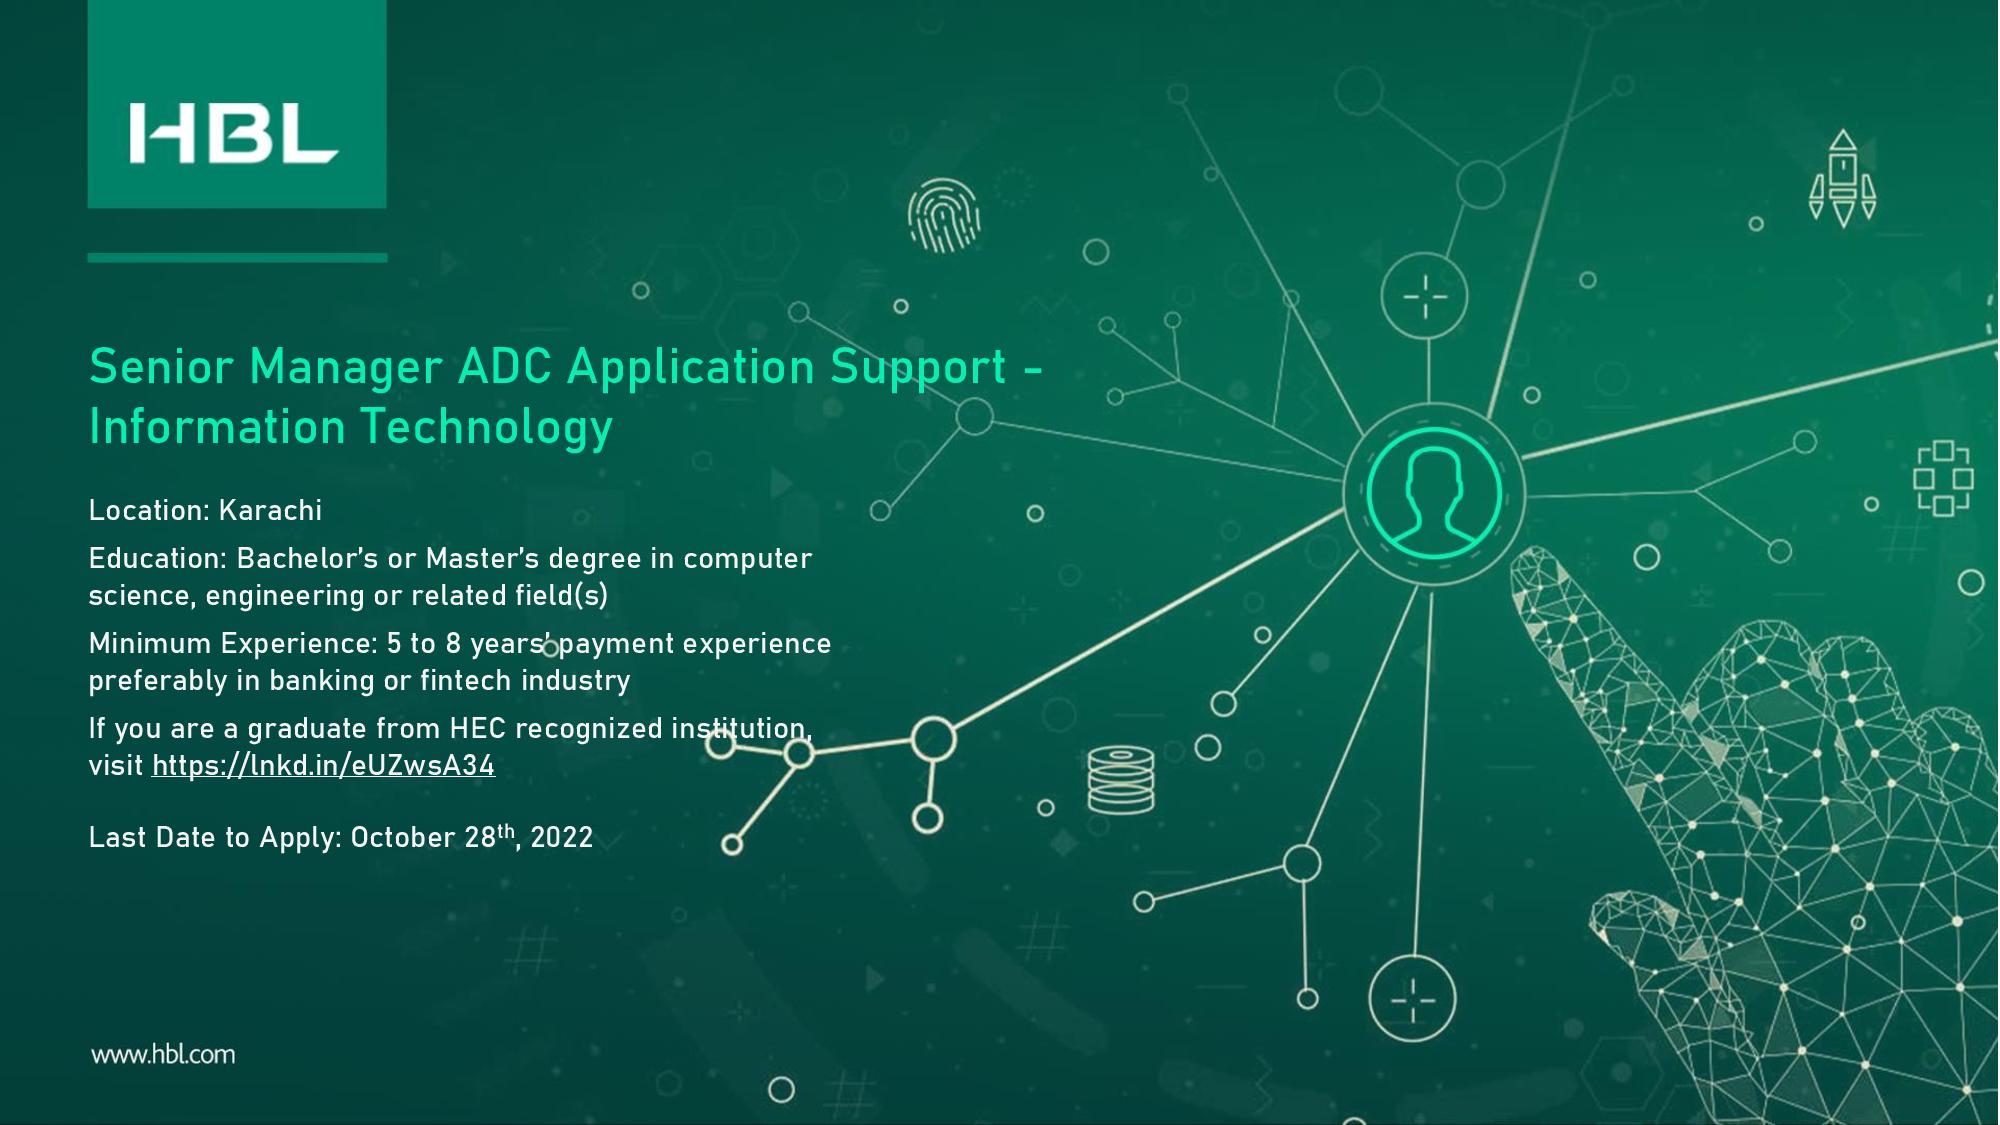 HBL is looking to hire a Senior Manager ADC Application Support